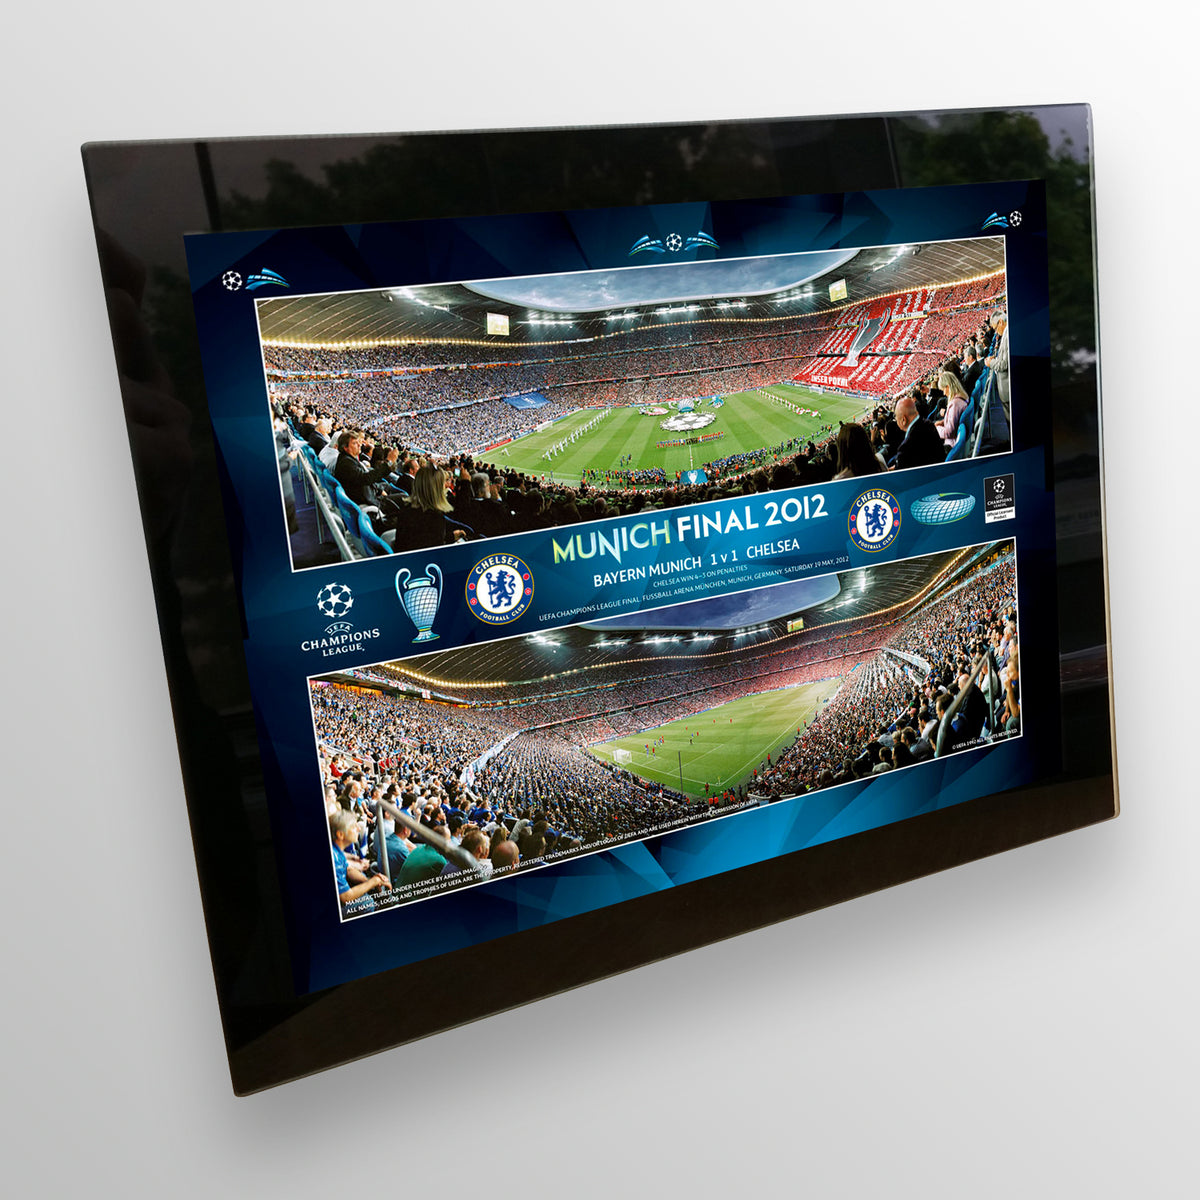 UEFA Champions League 2012 Final - Winner: Chelsea UEFA Club Competitions Online Store